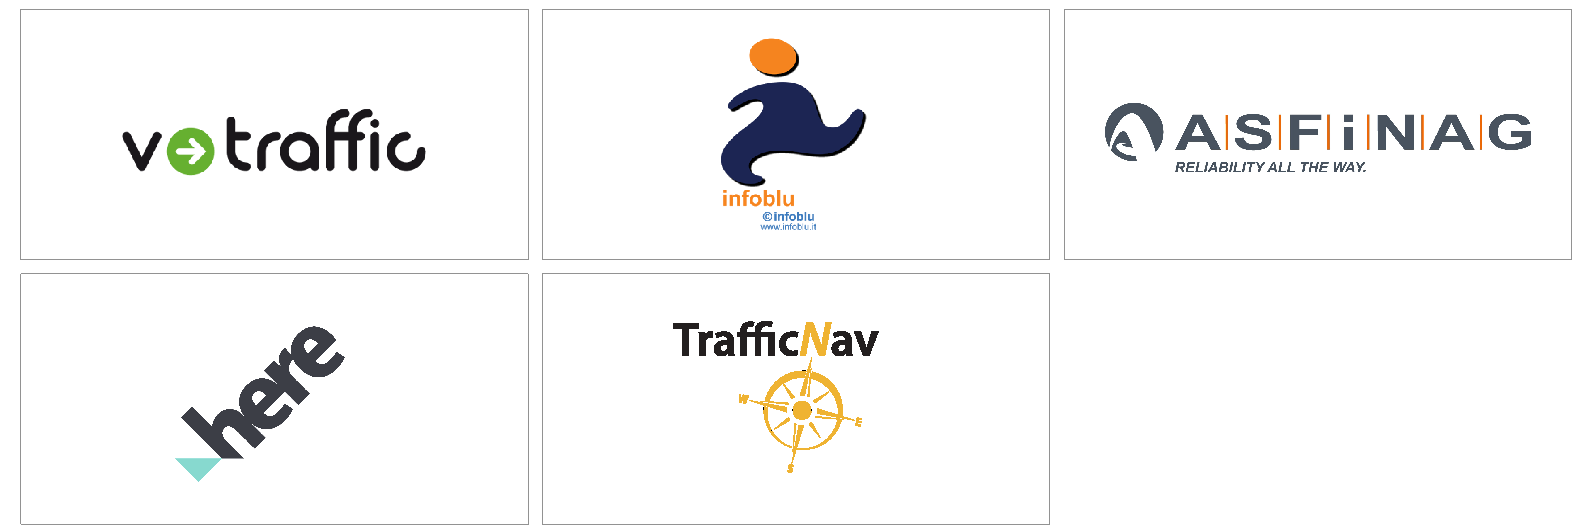 18w10 - Support site - Traffic providers logotypes